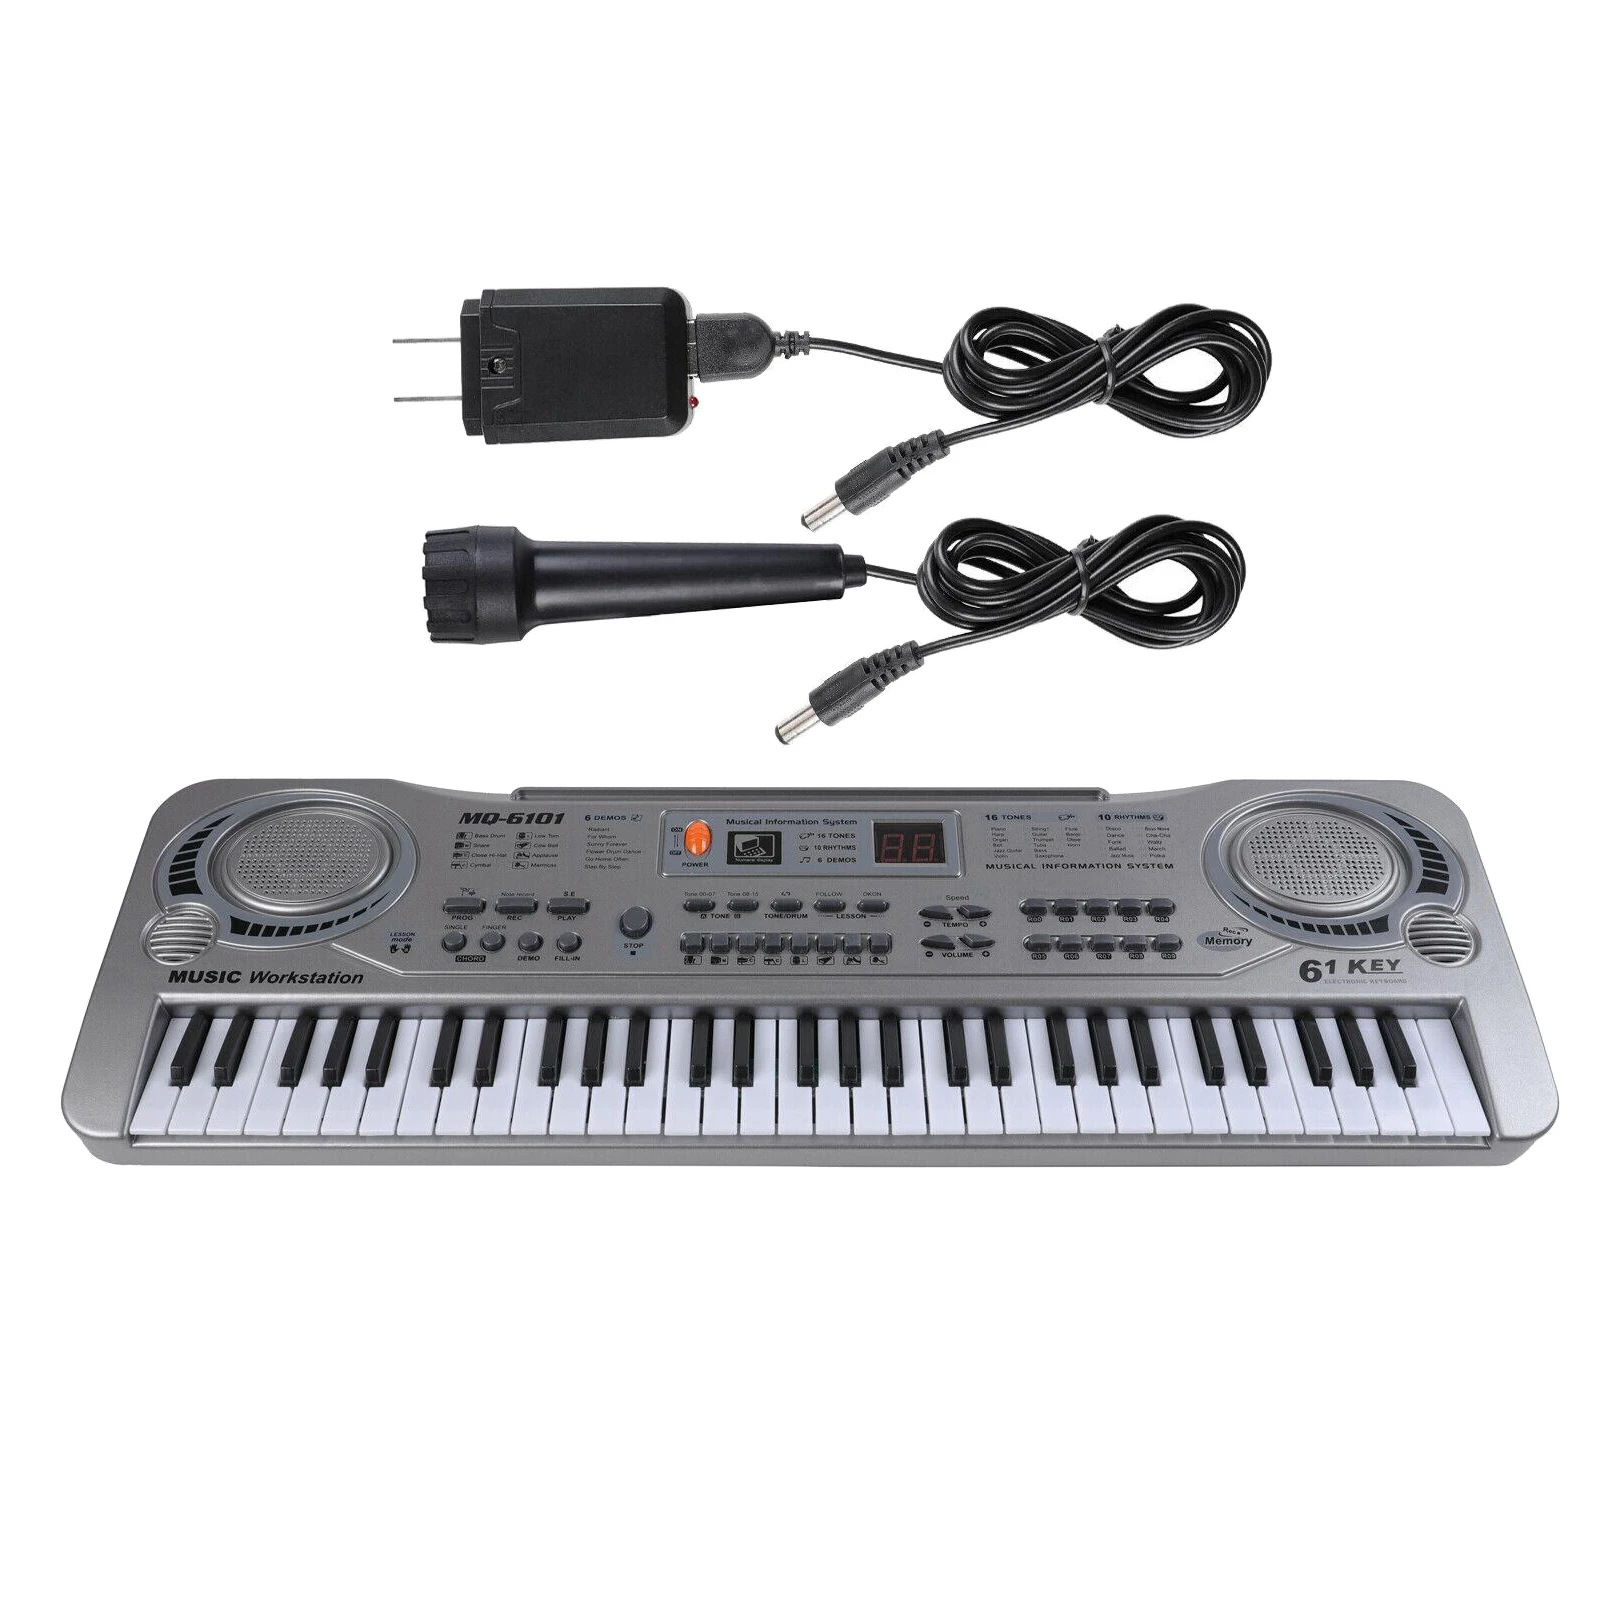 61 Keys Electronic Piano Keyboard Digital Piano Organ Music Instrument w/ Microphone Educational Toys for Beginners Adults Kids